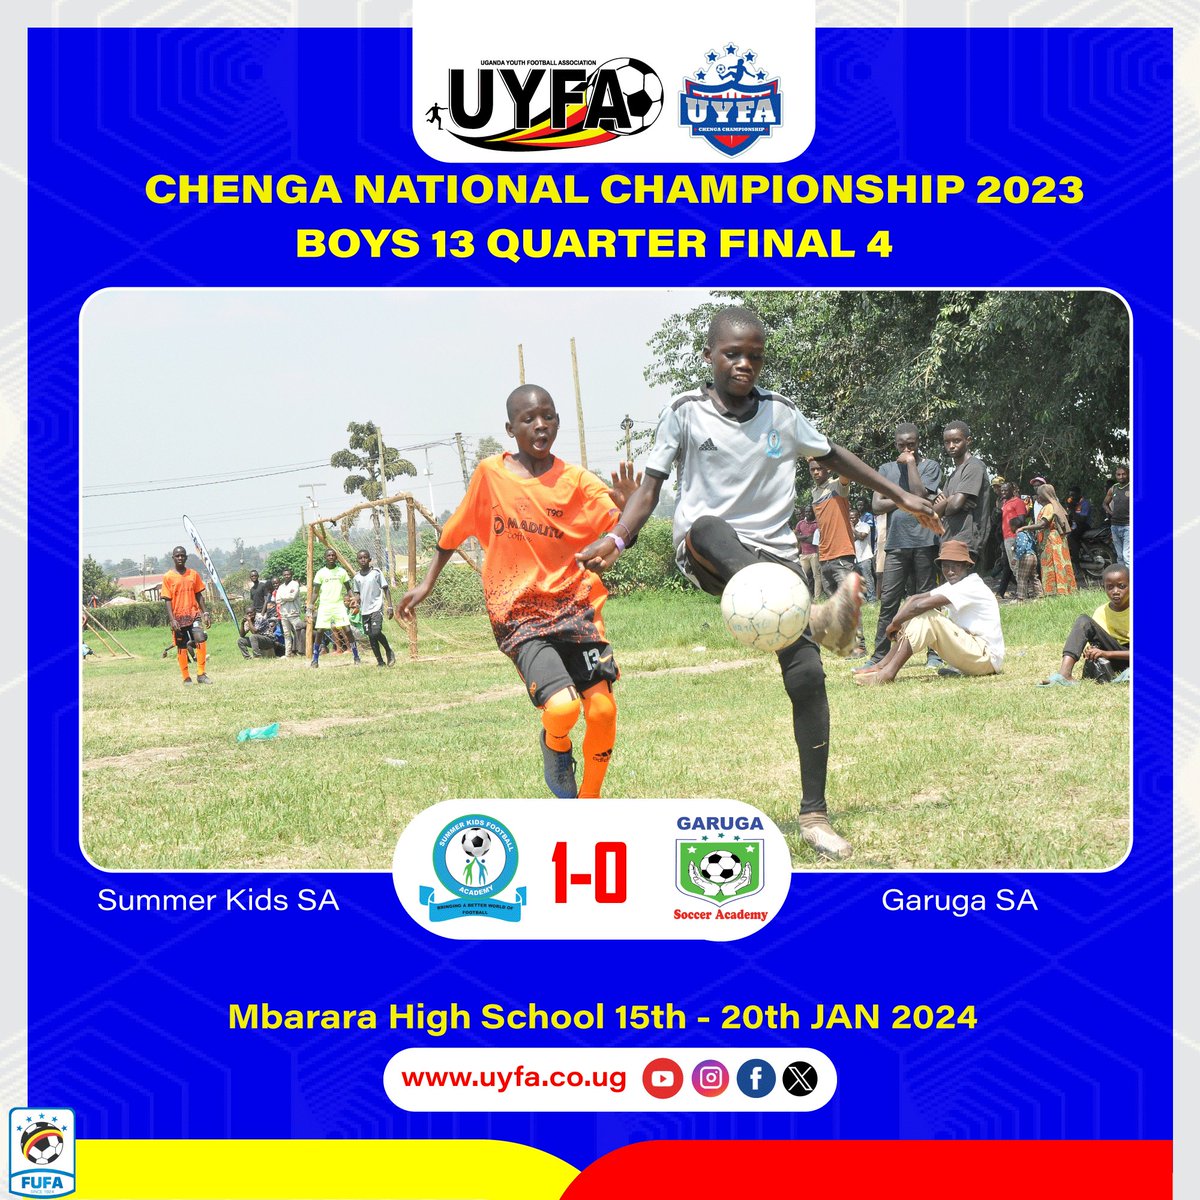 Summer Kids Soccer Academy from Busia, Eastern Region defeat Garuga Soccer Academy from Entebbe to take the 4th slot of the semi finals of the @UYFA Chenga National Championship.